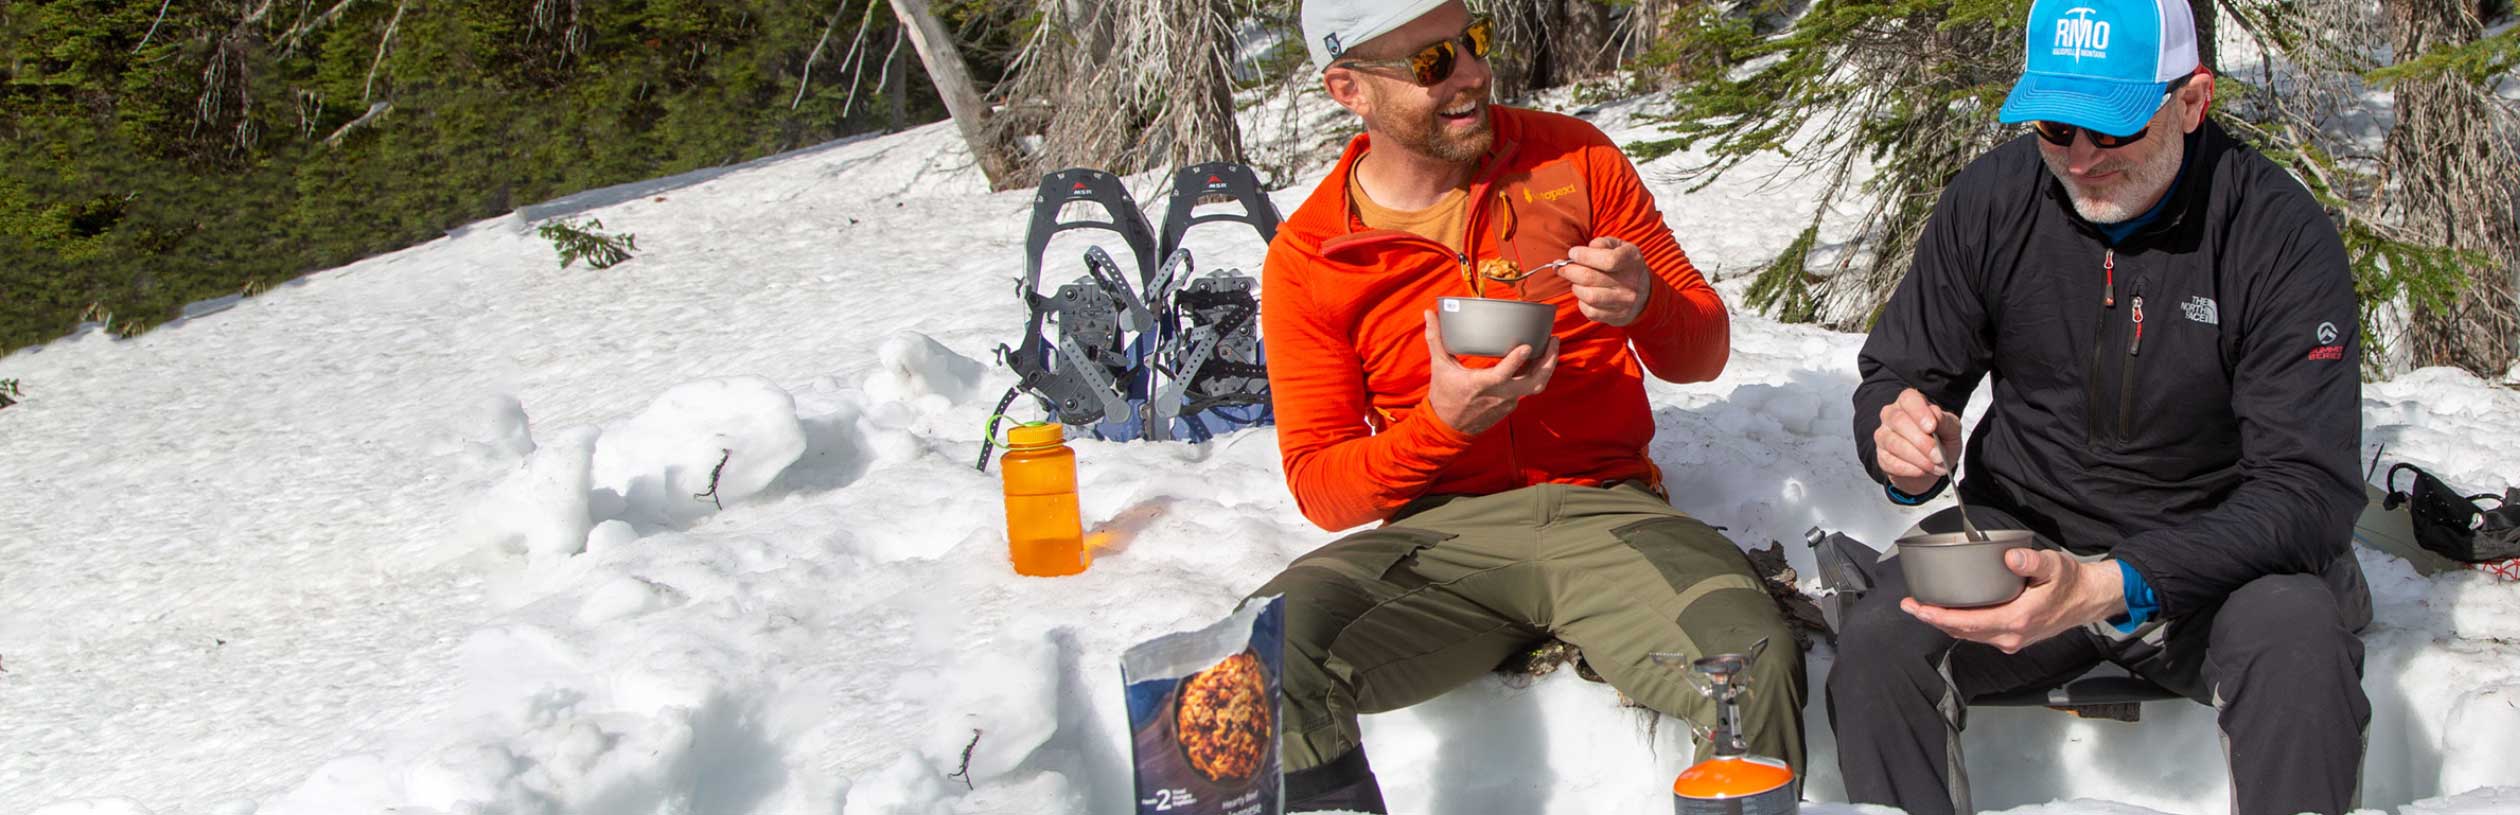 Two people eating freshly cooked RightOnTrek Hearty Beef Bolognese while snowshoeing in the backcountry